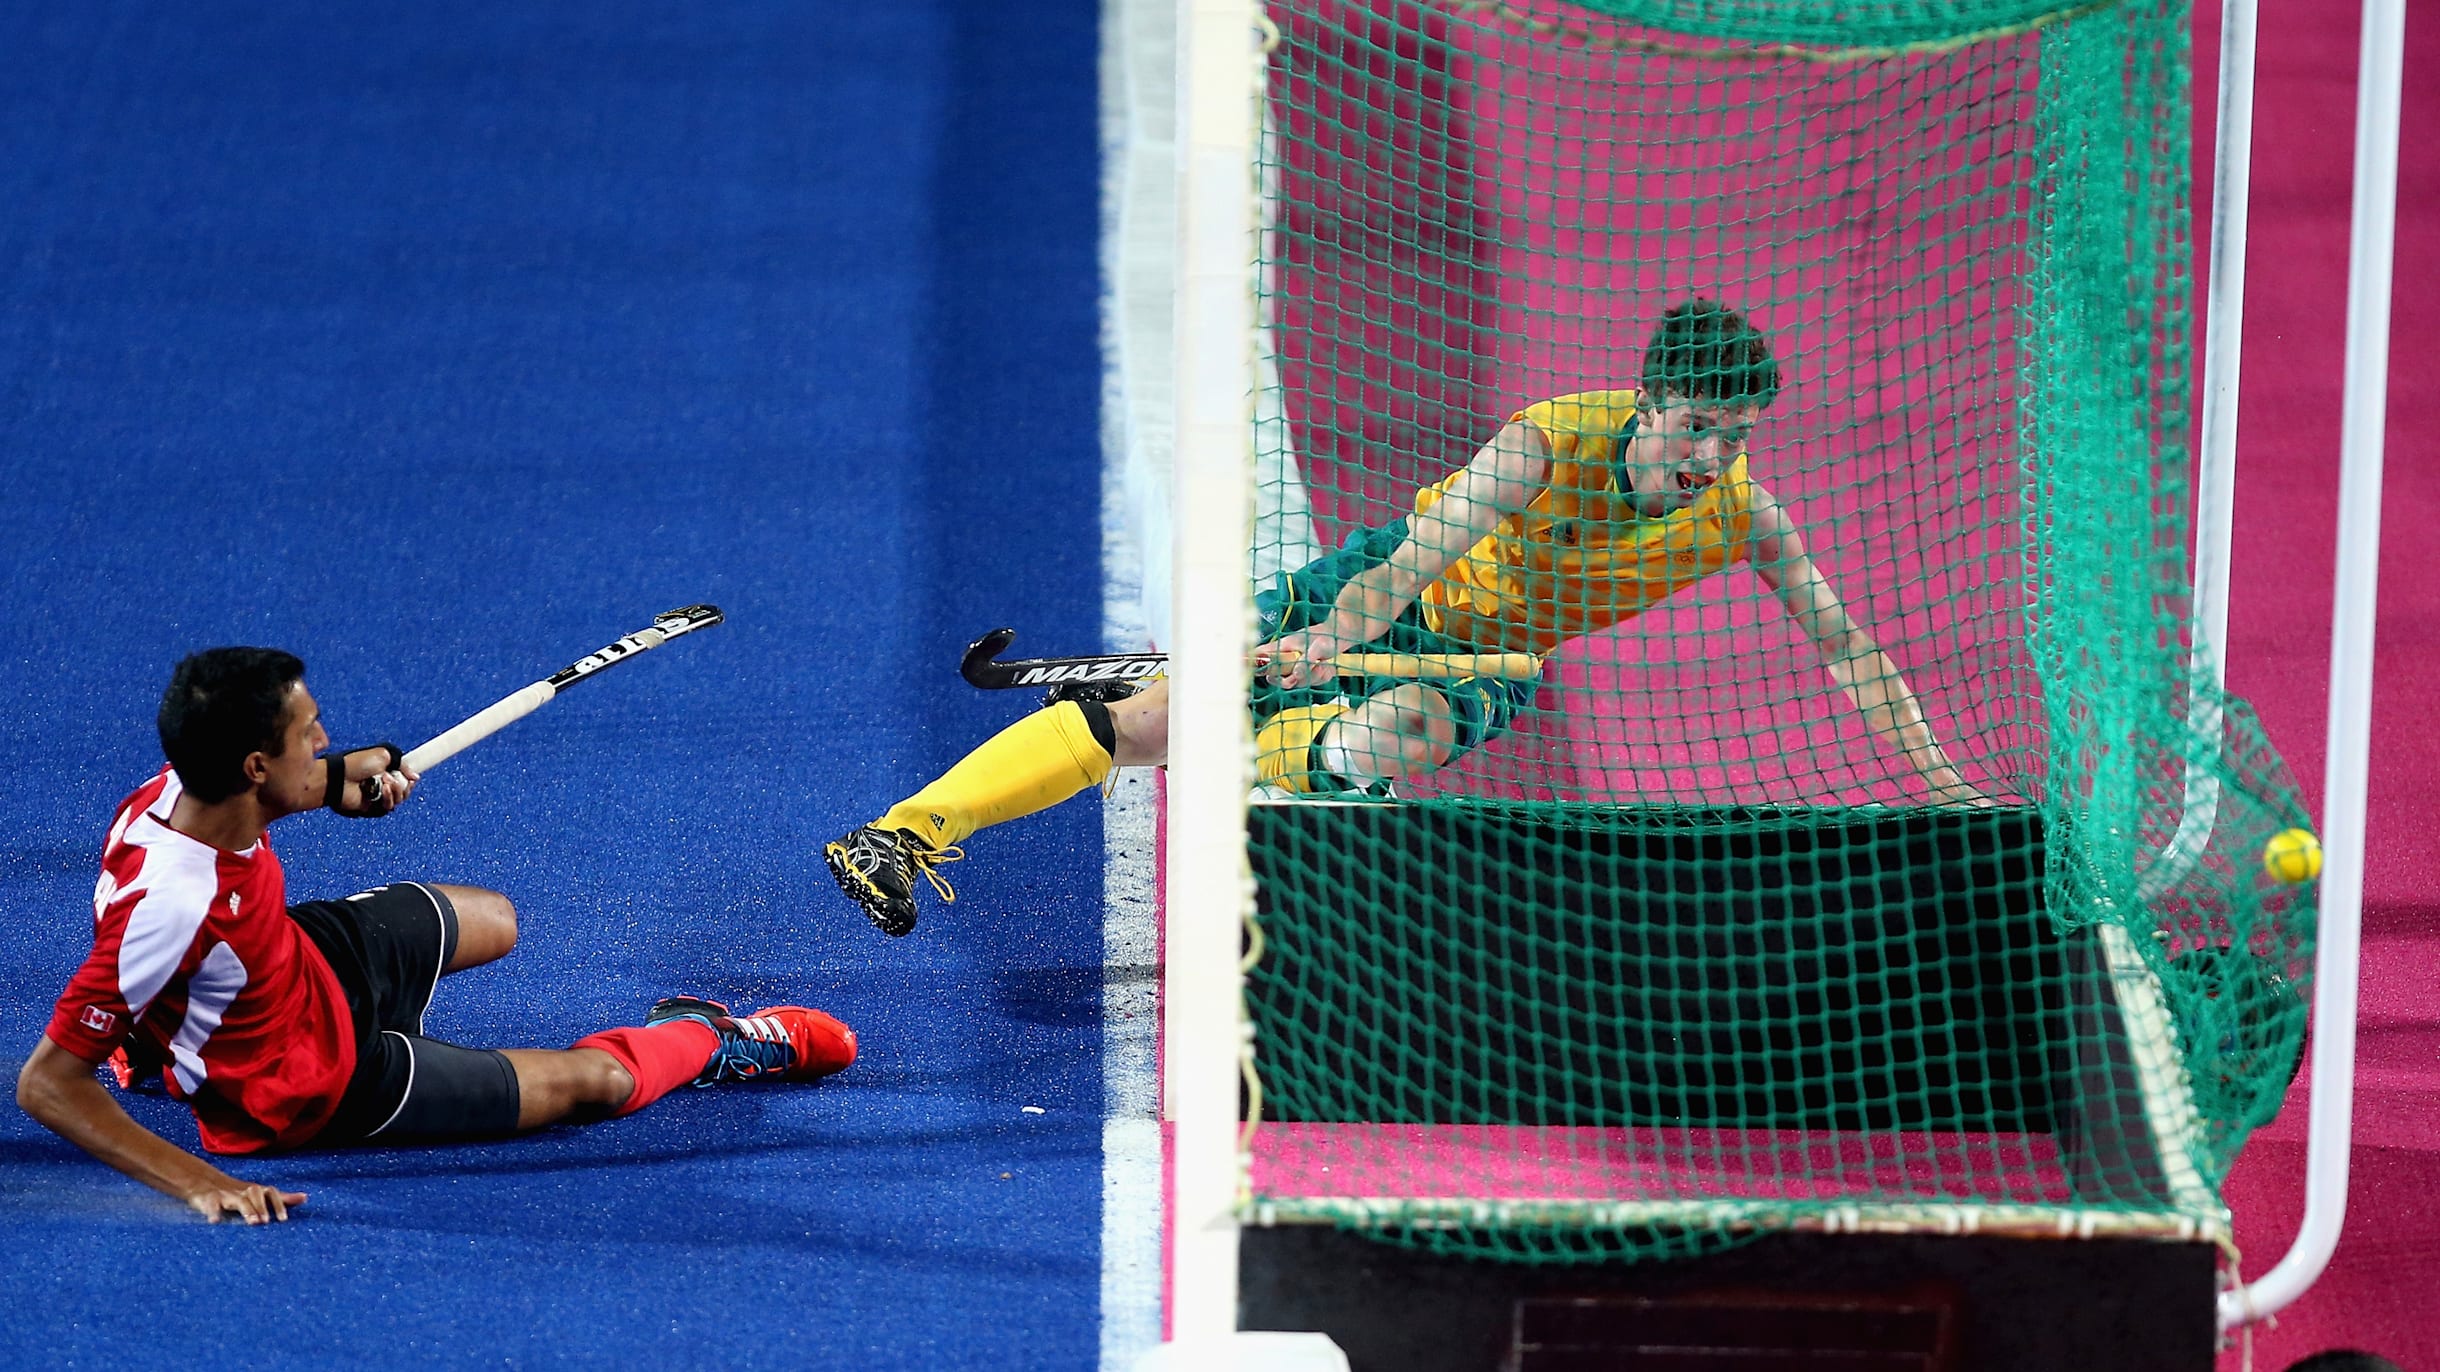 USA Field Hockey going to new heights without a net in goal